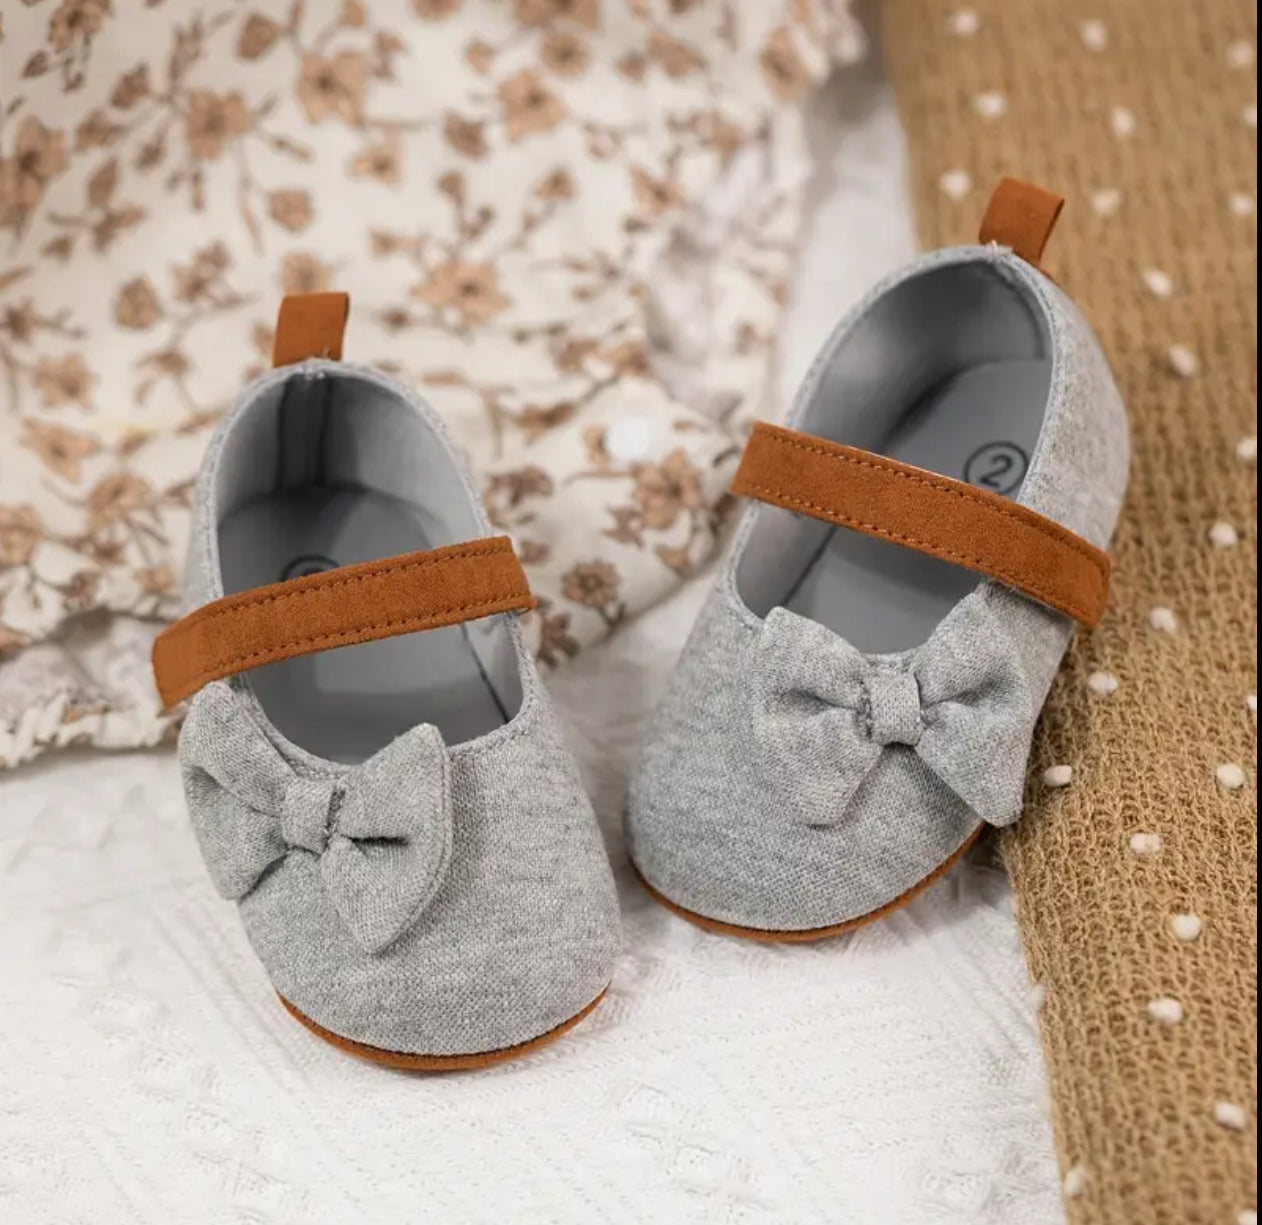 Infant Baby Girls Plush Mary Jane Flats, Bowknot Design Soft Sole, Chic Earth Tones, Glam ✨ Baby Collection